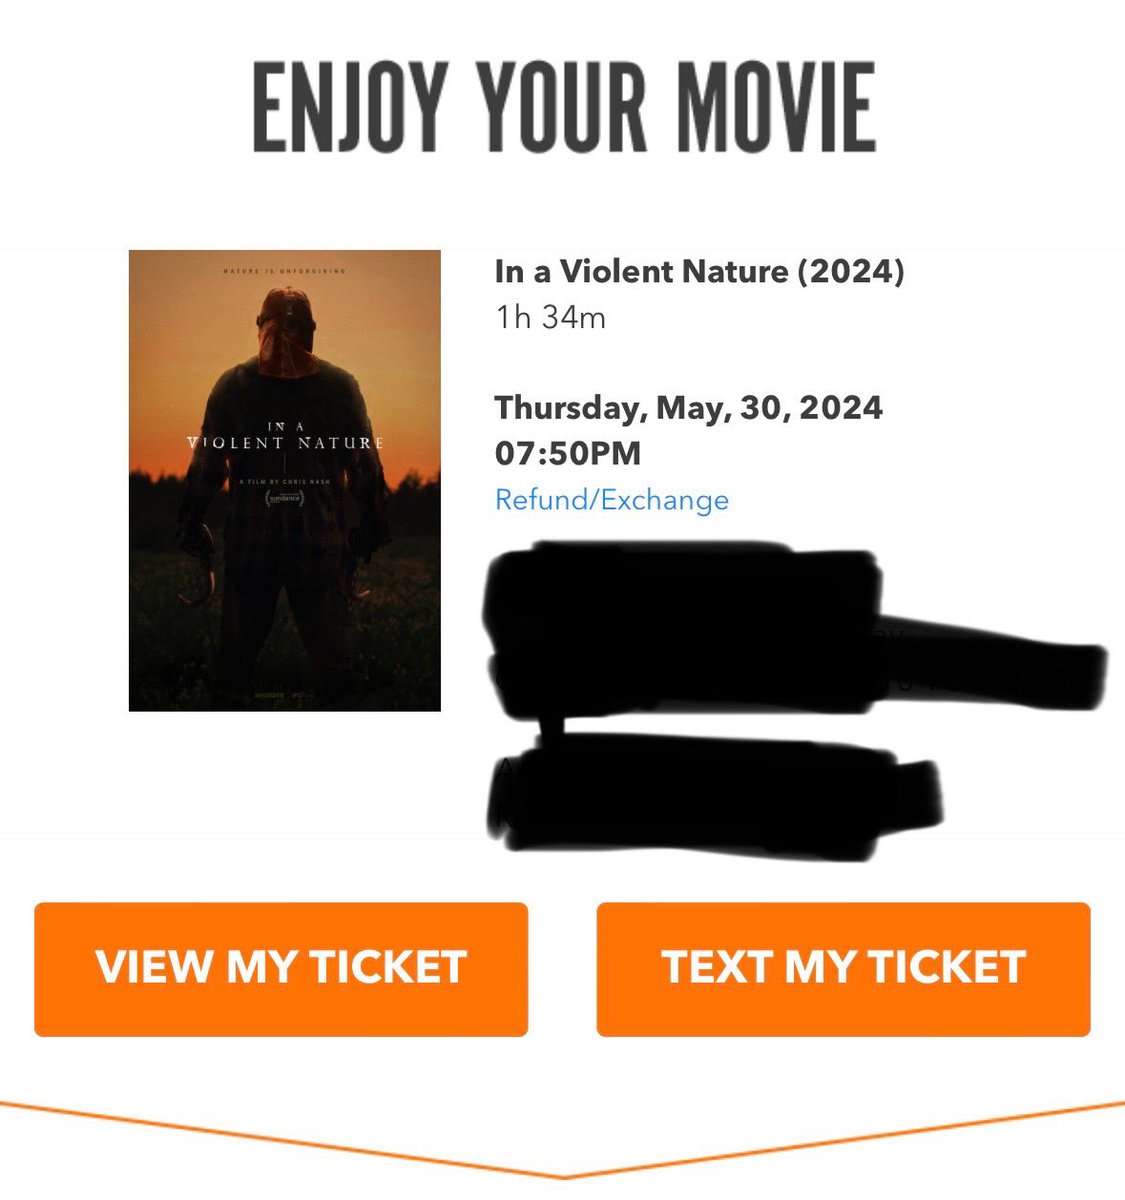 Tix snagged! Cannot wait to see this in the theatre. 

#inaviolentnature